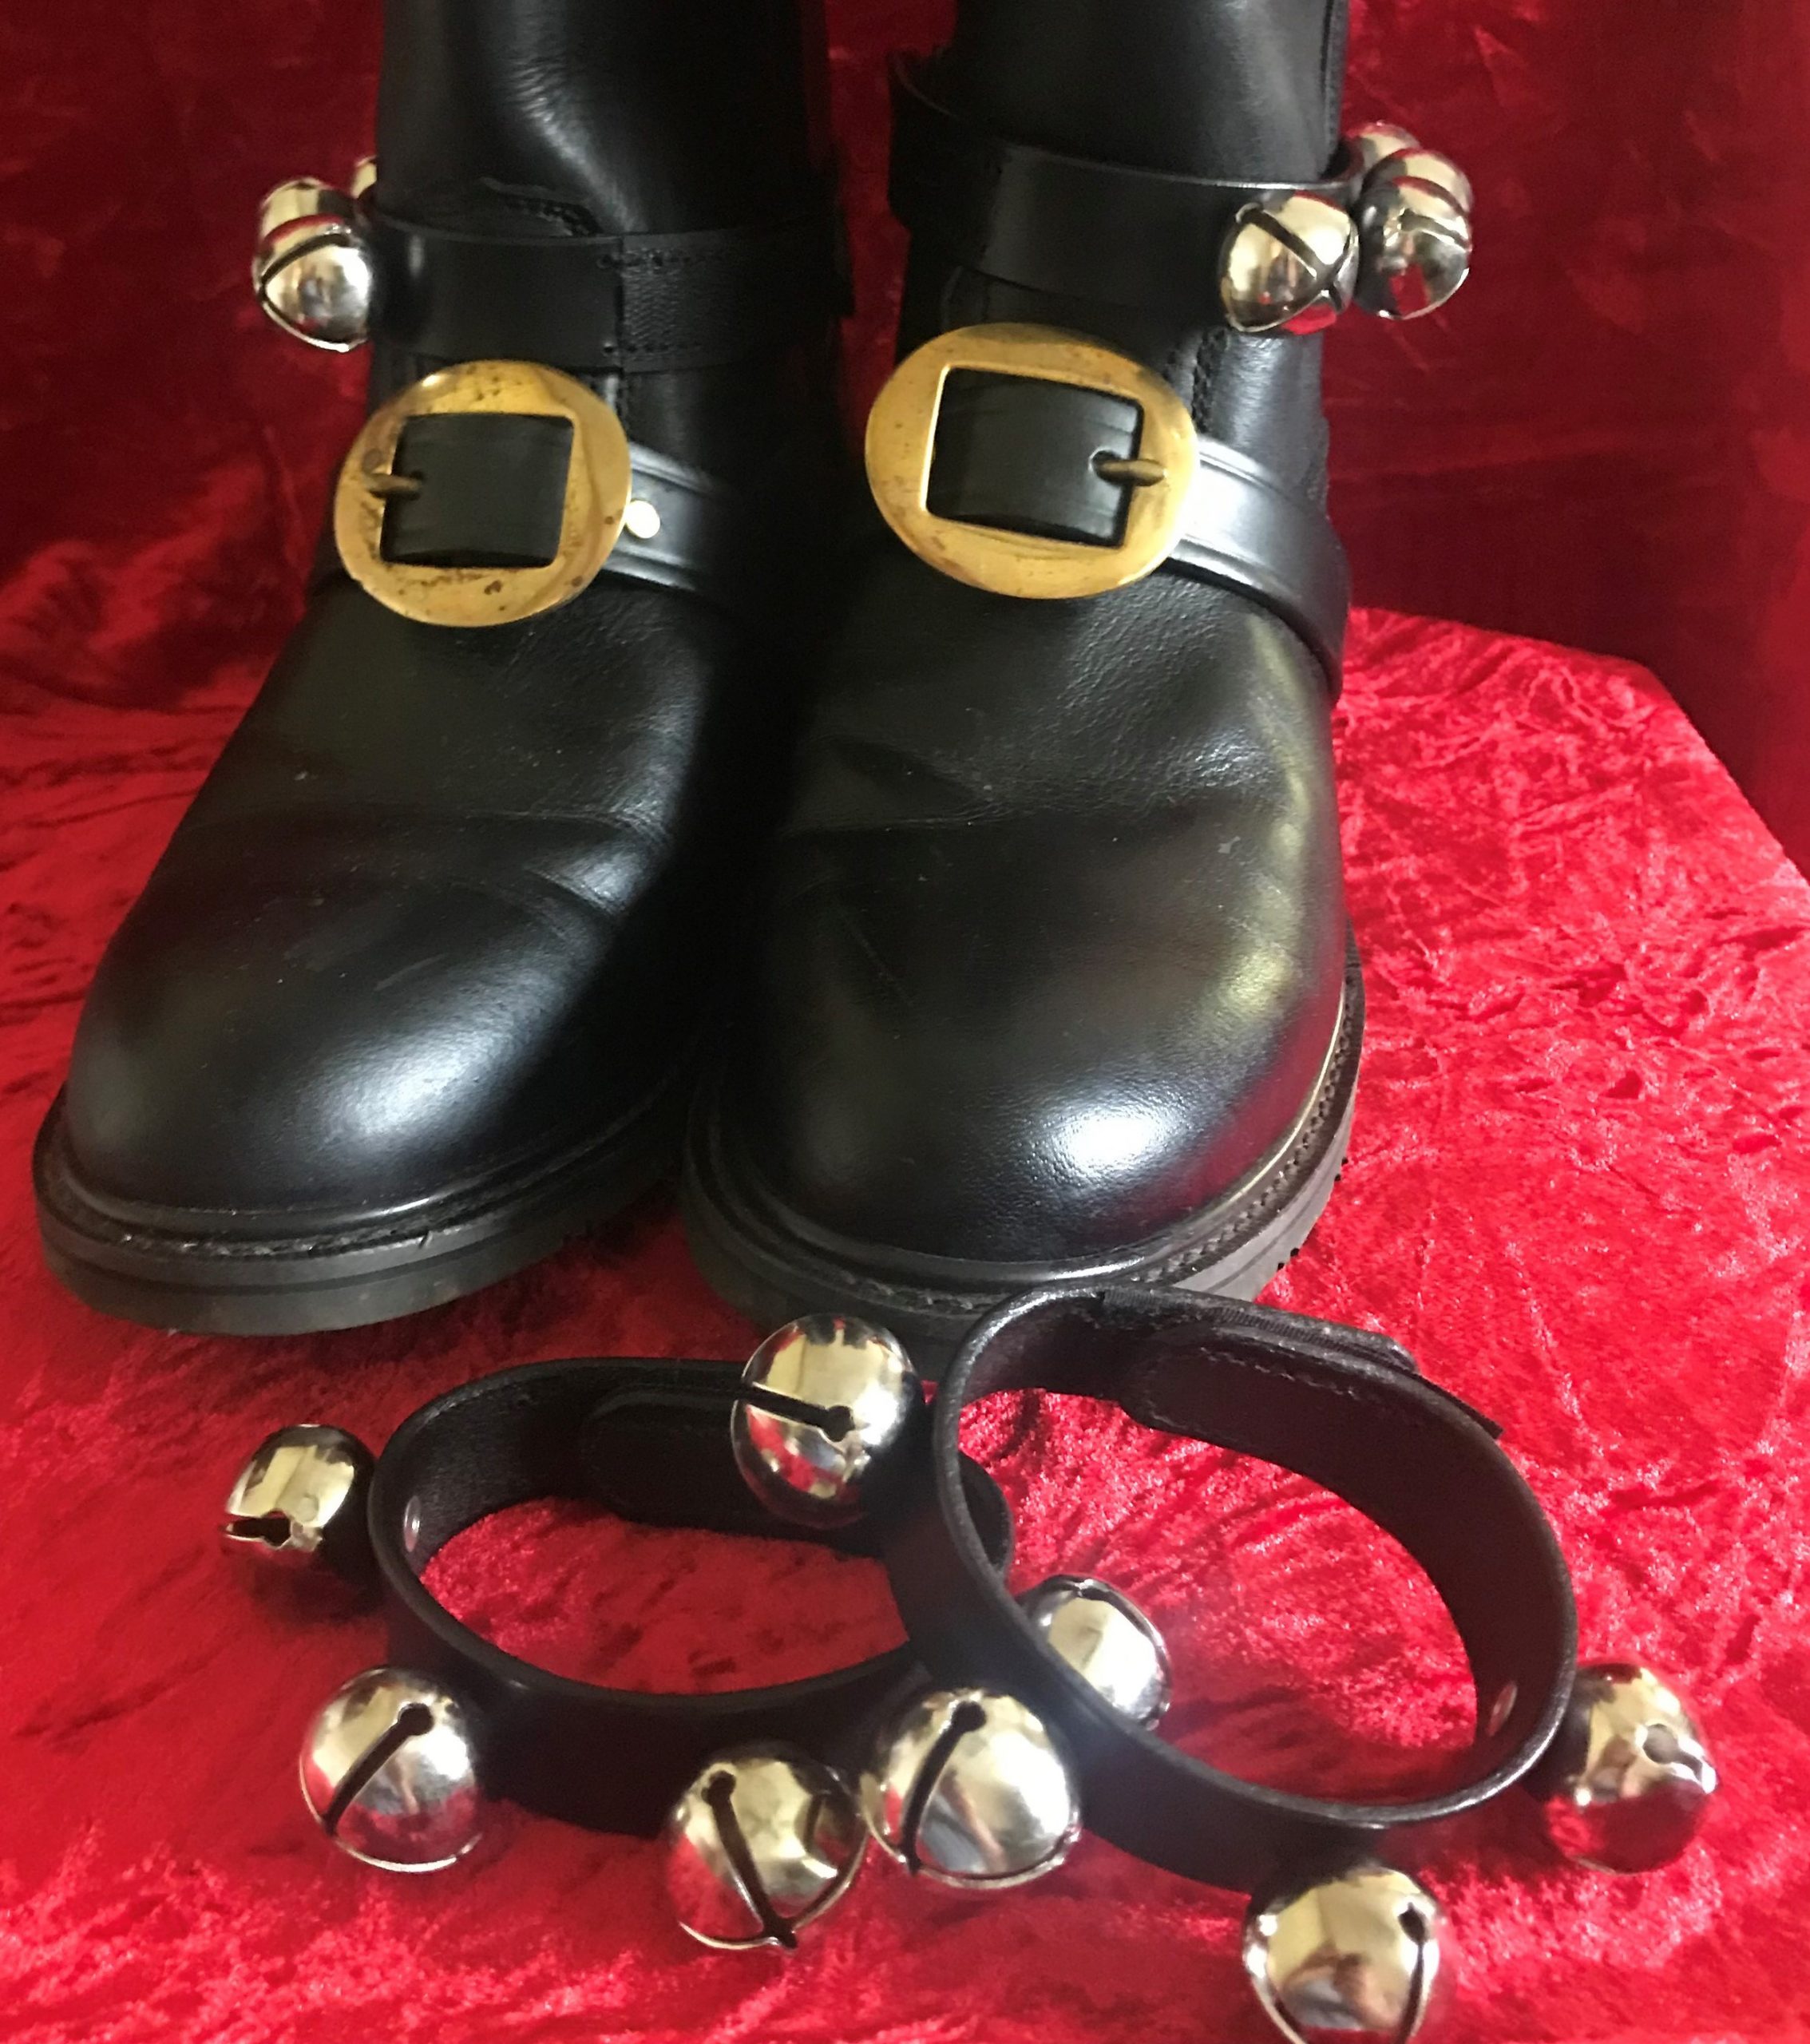 Wrist Bells 4 Bell Set and Ankle 5 Bell Set Economy Lightweight with Velcro Closure and 1/2 Inch Bells